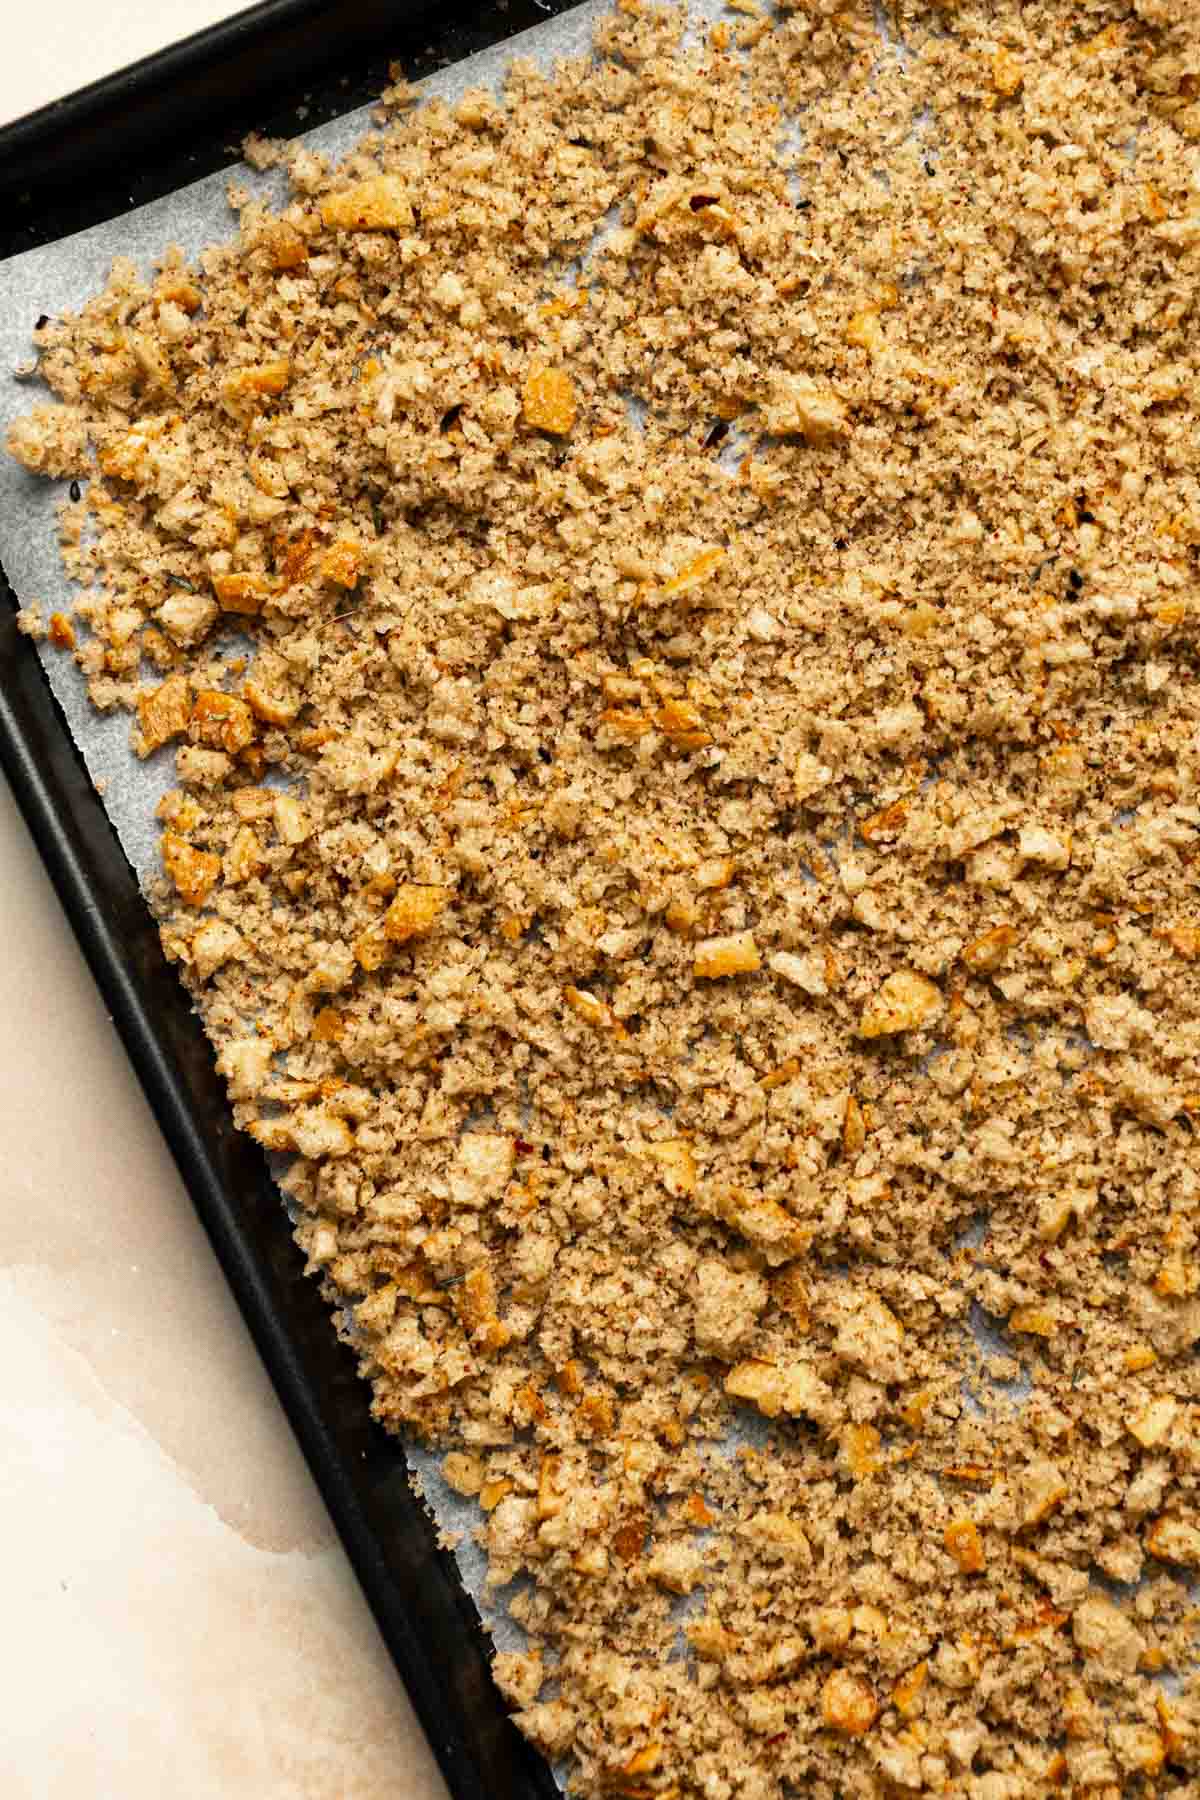 Breadcrumbs laid out on a lined baking sheet before baking.